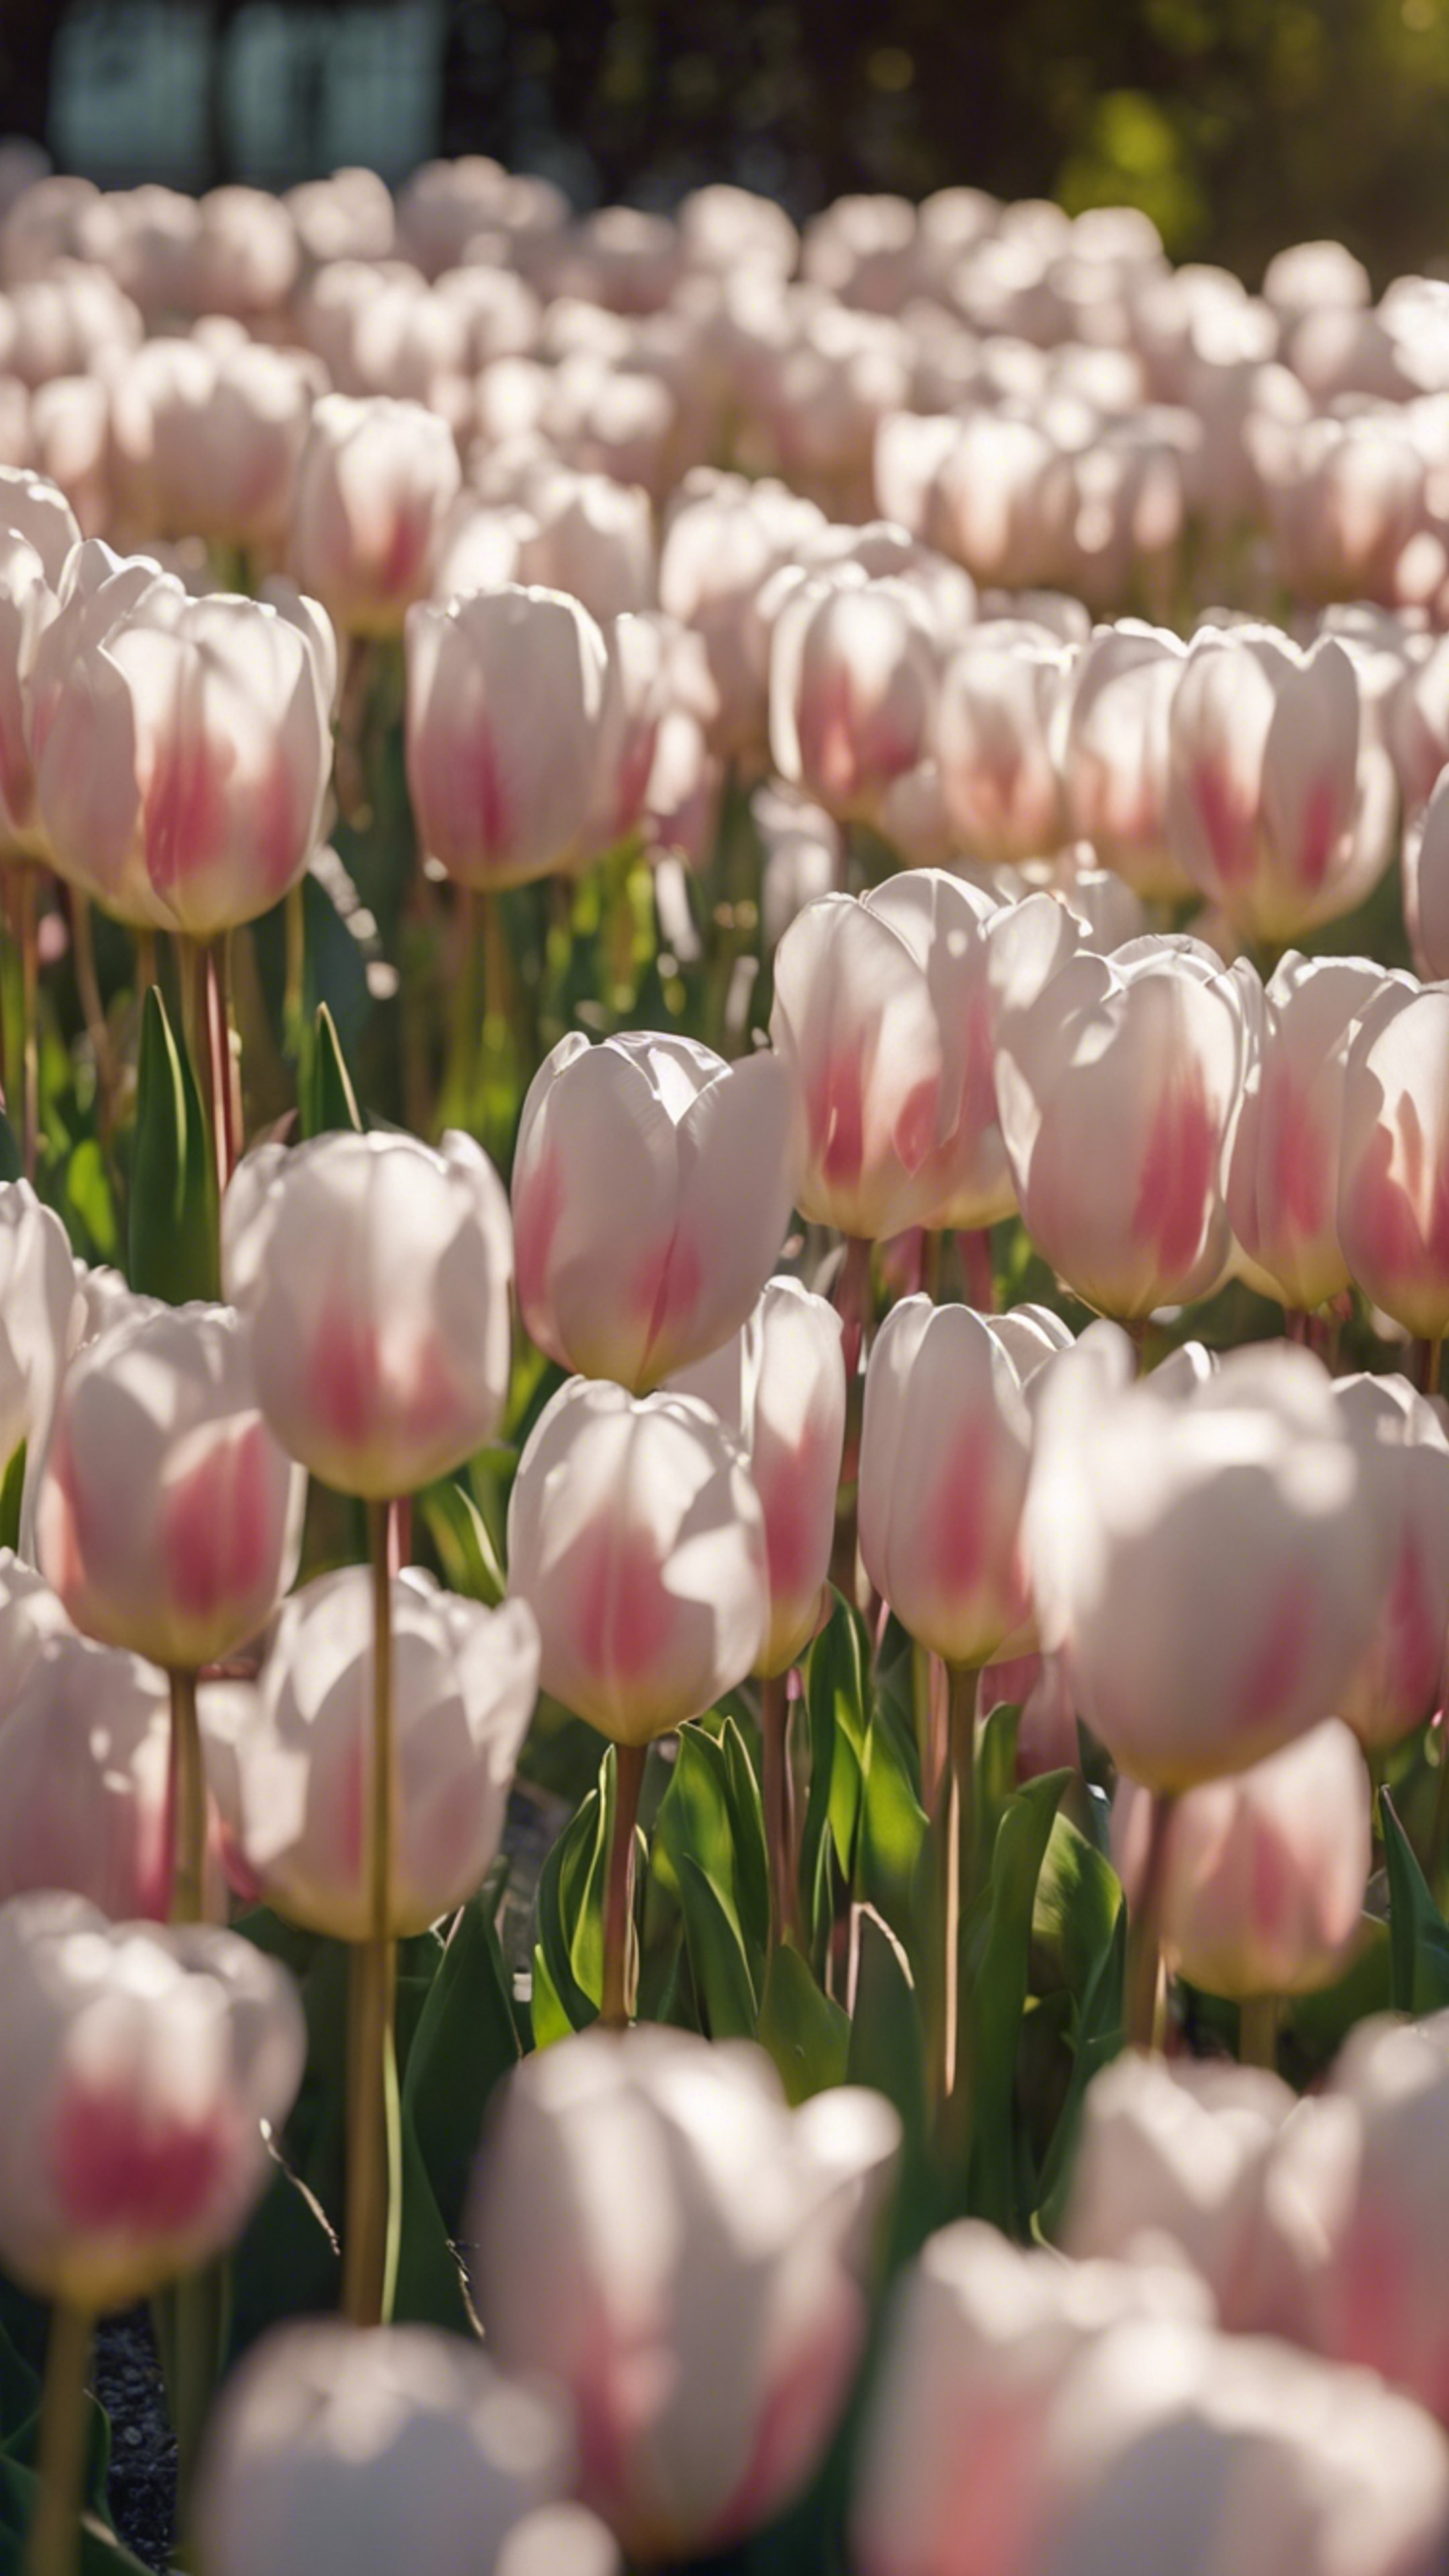 A garden filled with white and pink tulips, shimmering under the soft glow of a morning sun.壁紙[0043435f230e41f4a509]